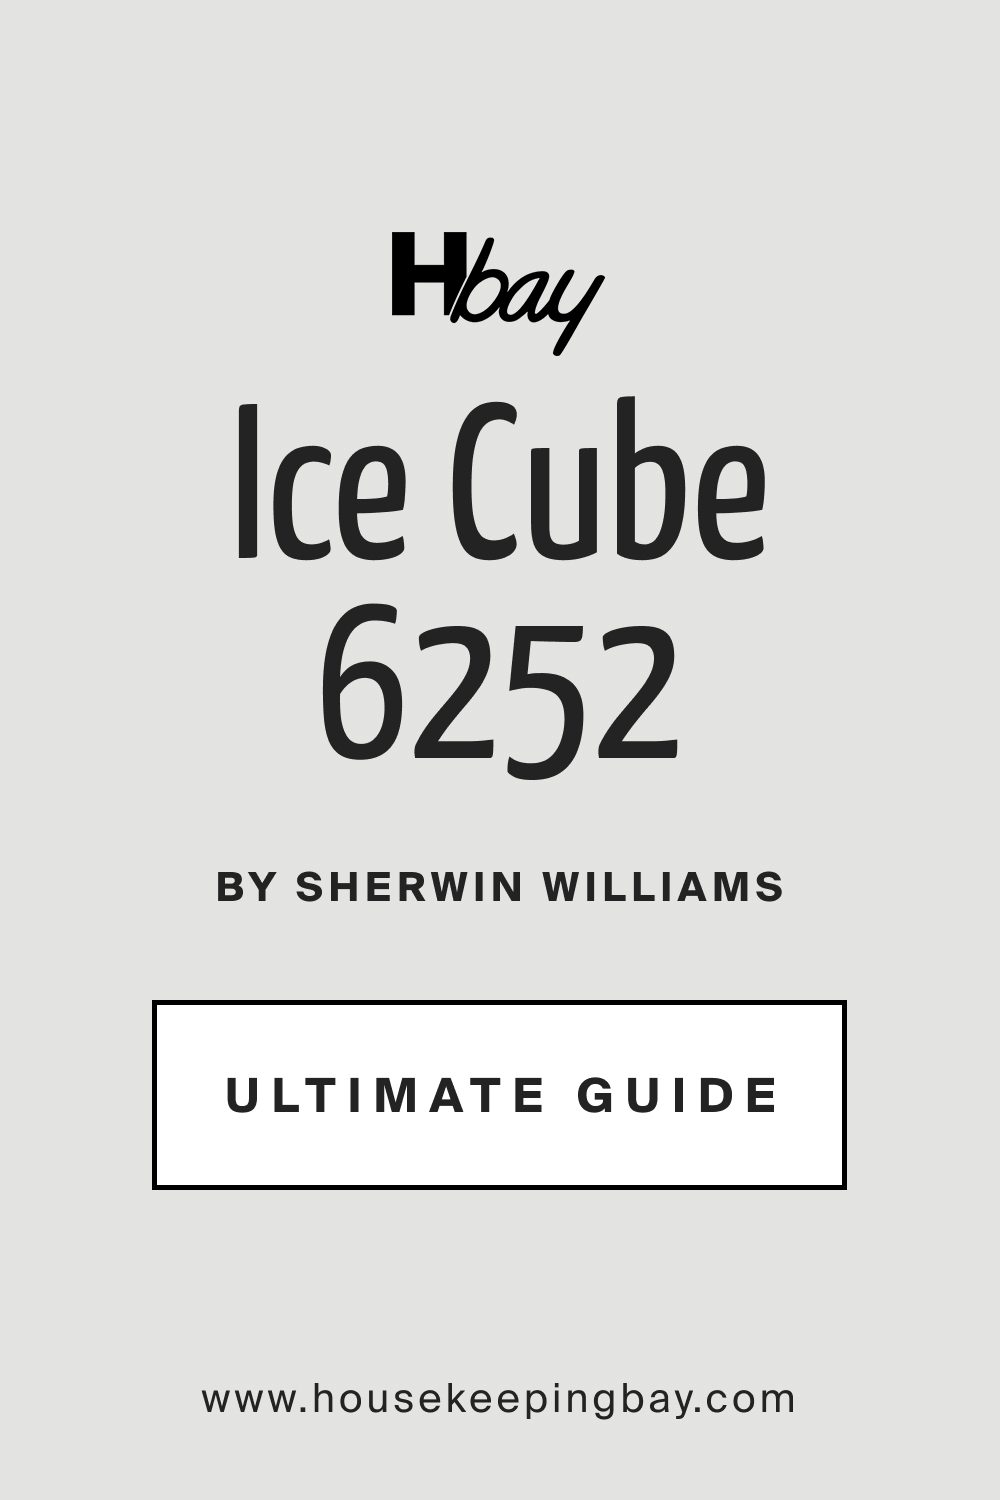 SW 6252 Ice Cube by Sherwin Williams Ultimate Guide